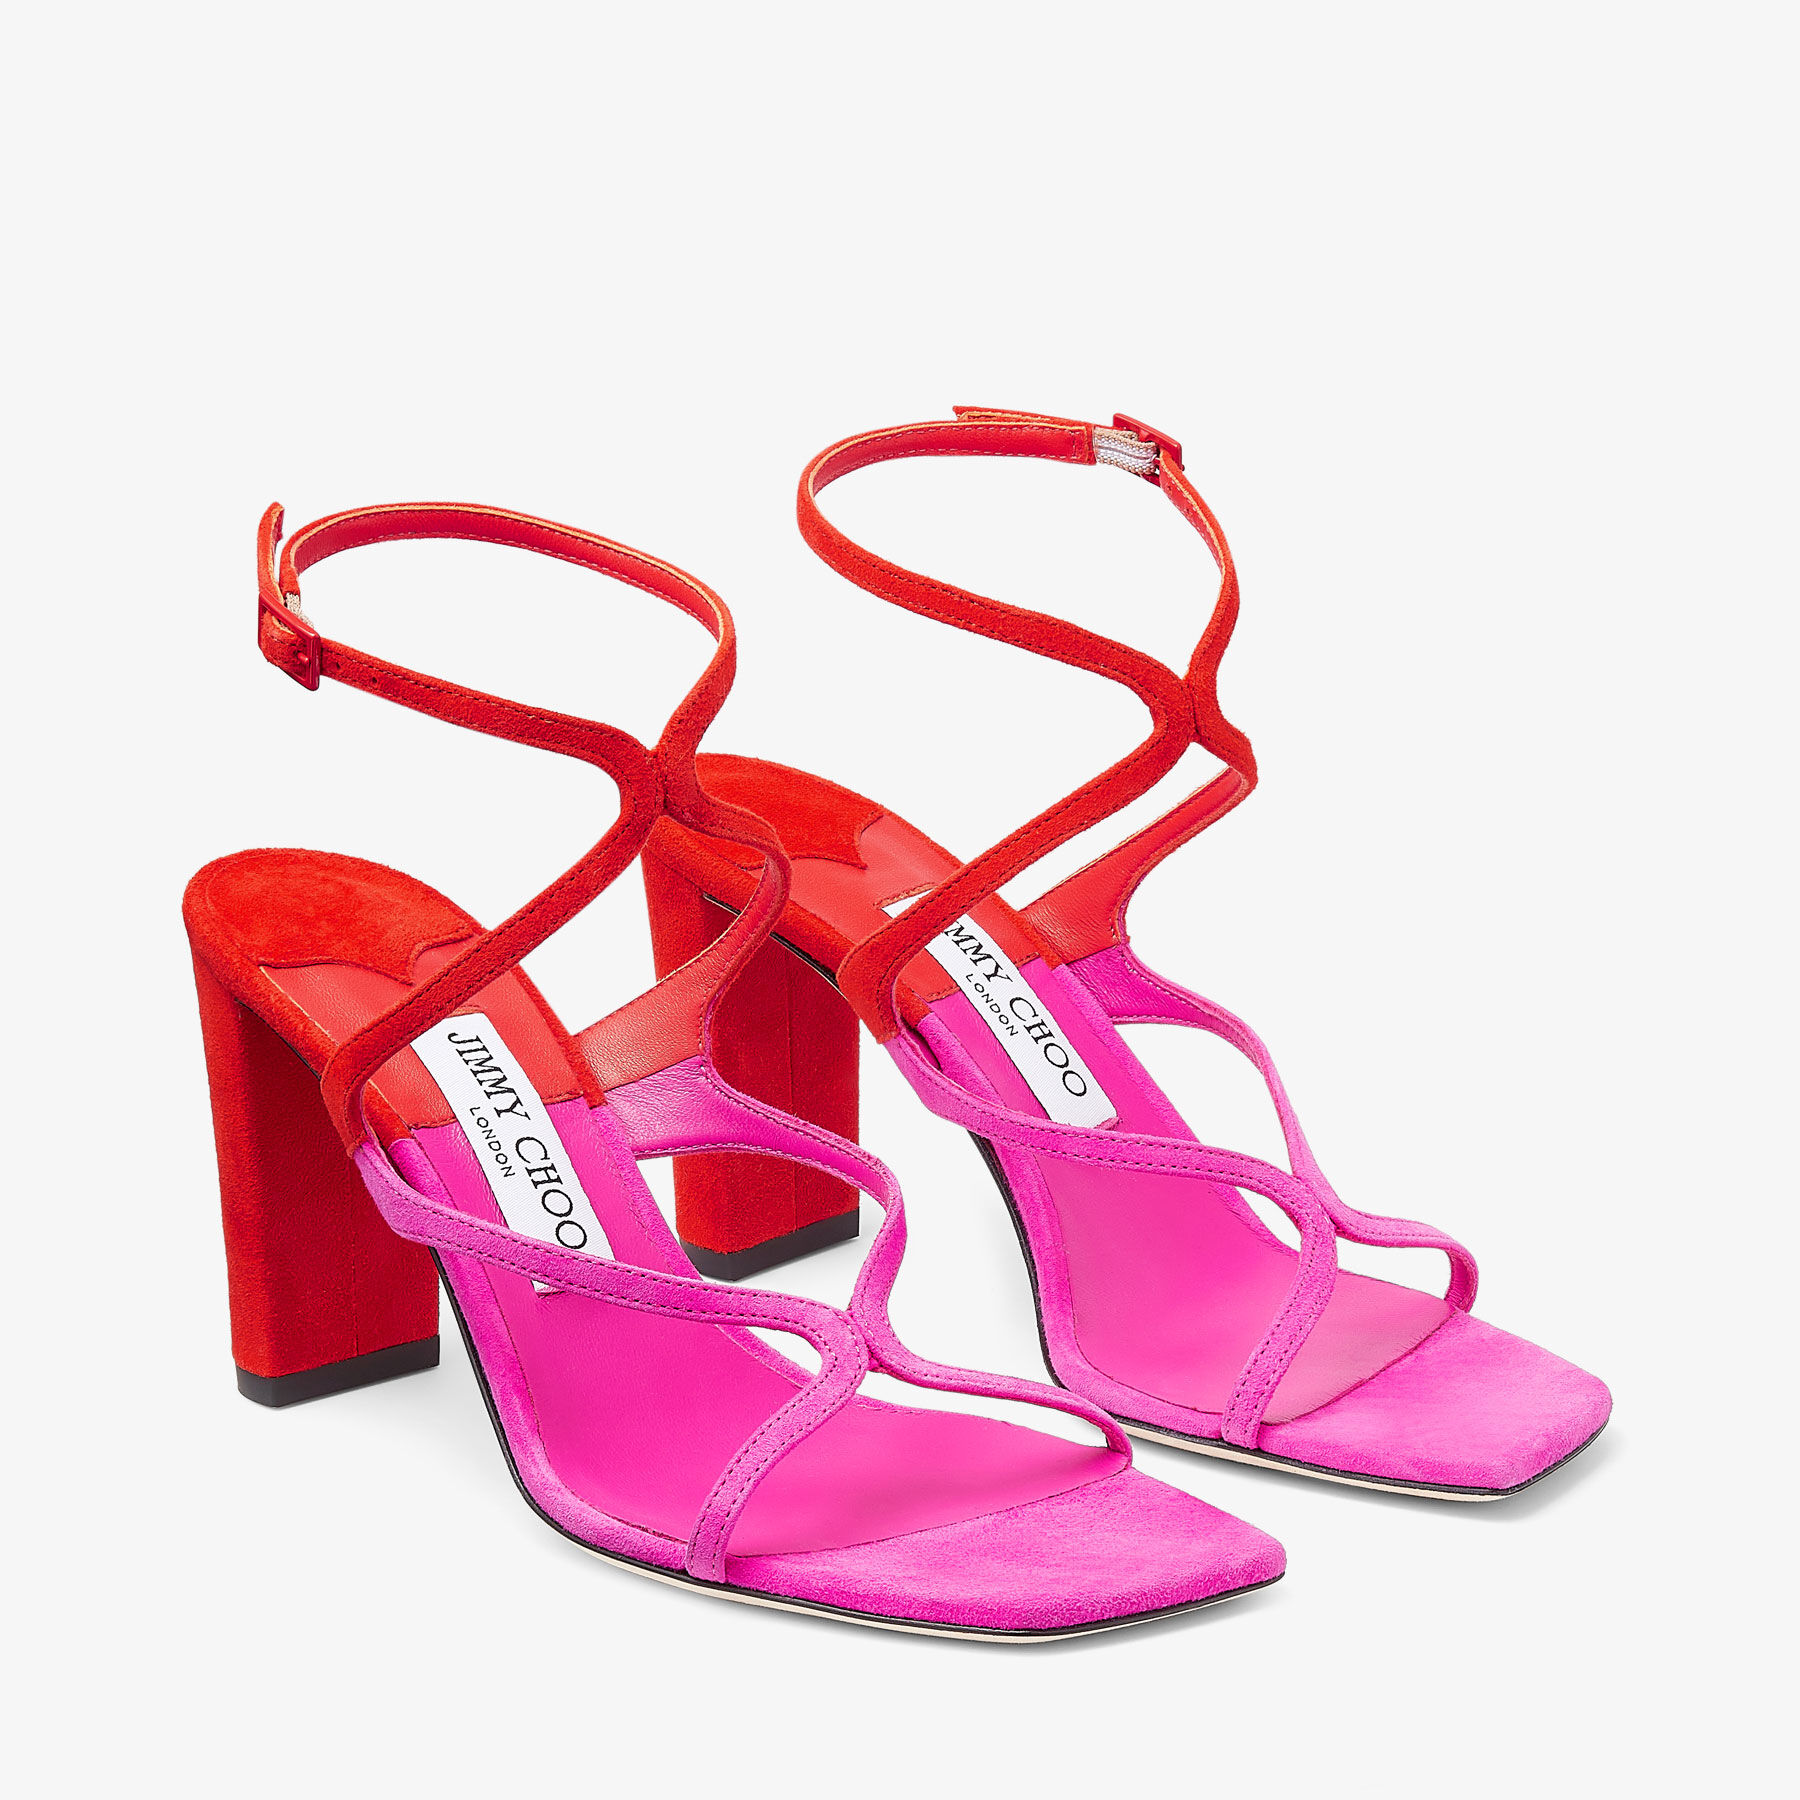 Azie 85 | Fuchsia and Paprika Patchwork Suede Sandals | JIMMY CHOO